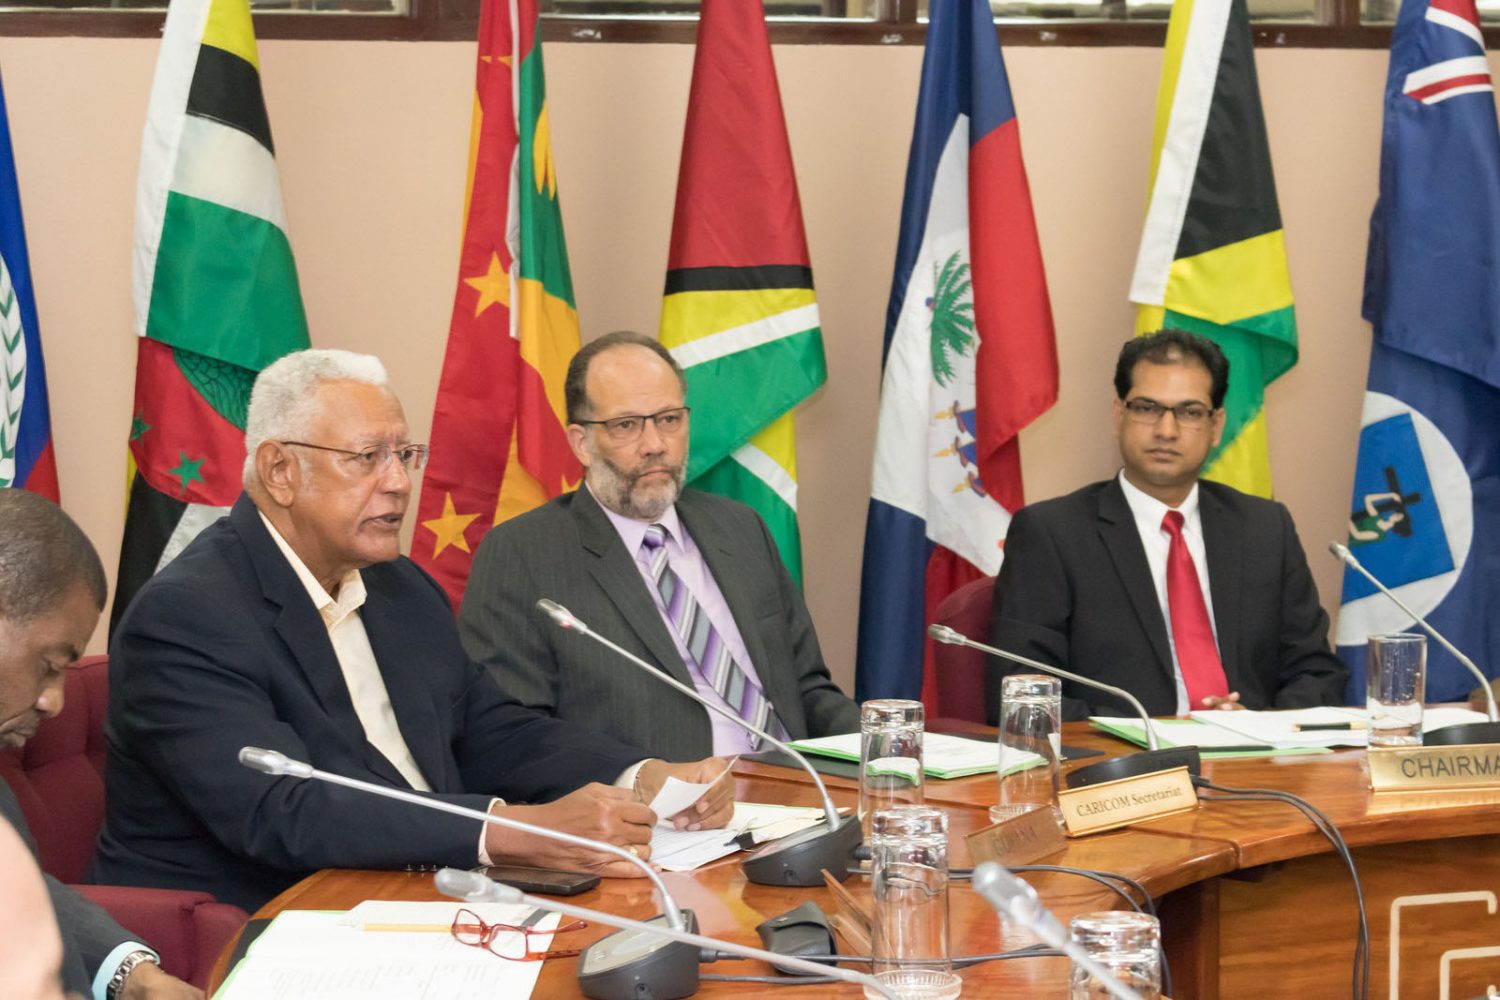 Minister of Agriculture of Guyana, Noel Holder (left), delivering remarks at the meeting. Also in photo are CARICOM Secretary-General, Ambassador Irwin LaRocque (centre), and Chair of the Meeting, Minister of Agriculture, Animal Husbandry and Fisheries of Suriname, Soeresh Algoe. (CARICOM photo)